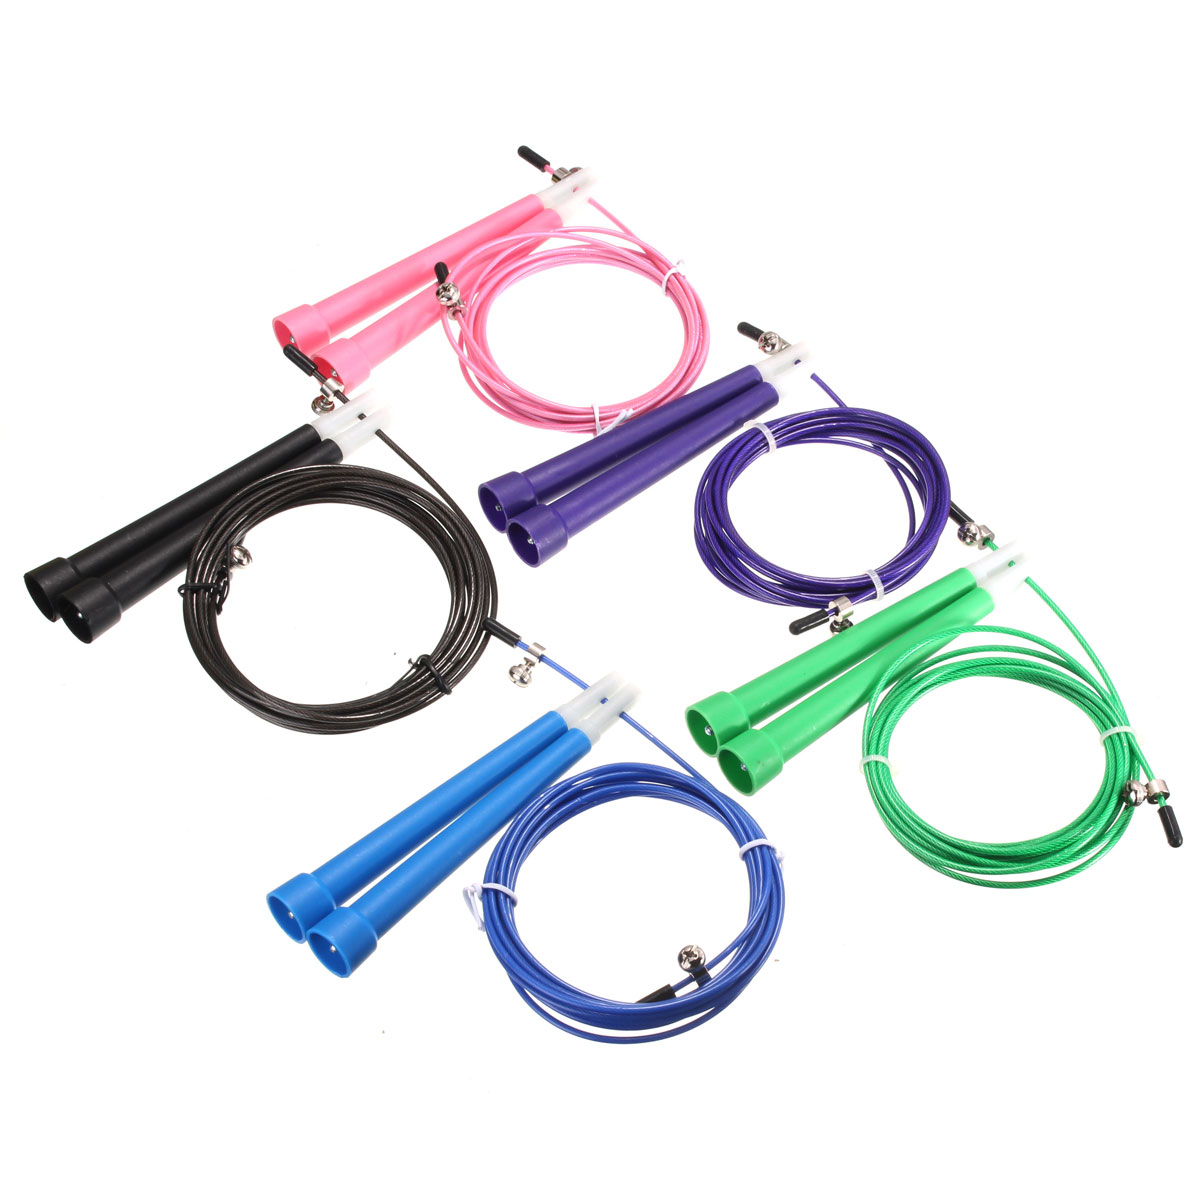 Upscale-Speed-Wire-Skipping-Adjustable-Jump-Rope-Exercise-Cardio-Sport-Rope-Jumping-1638233-2